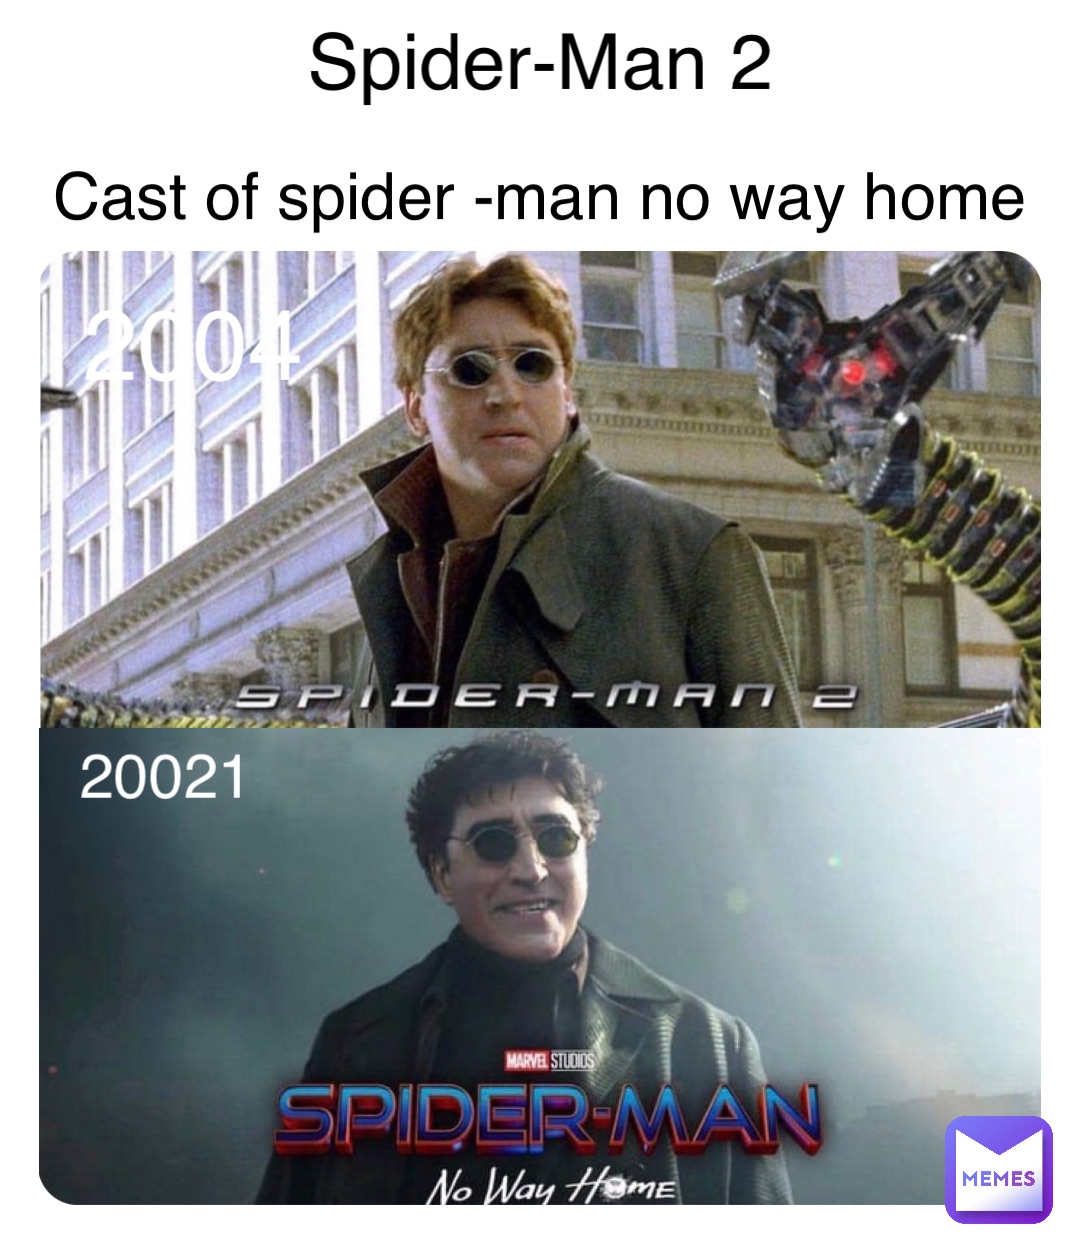 Spider-Man 2 2004 Cast of spider -man no way home 20021 | @vEwFYzXlSf |  Memes